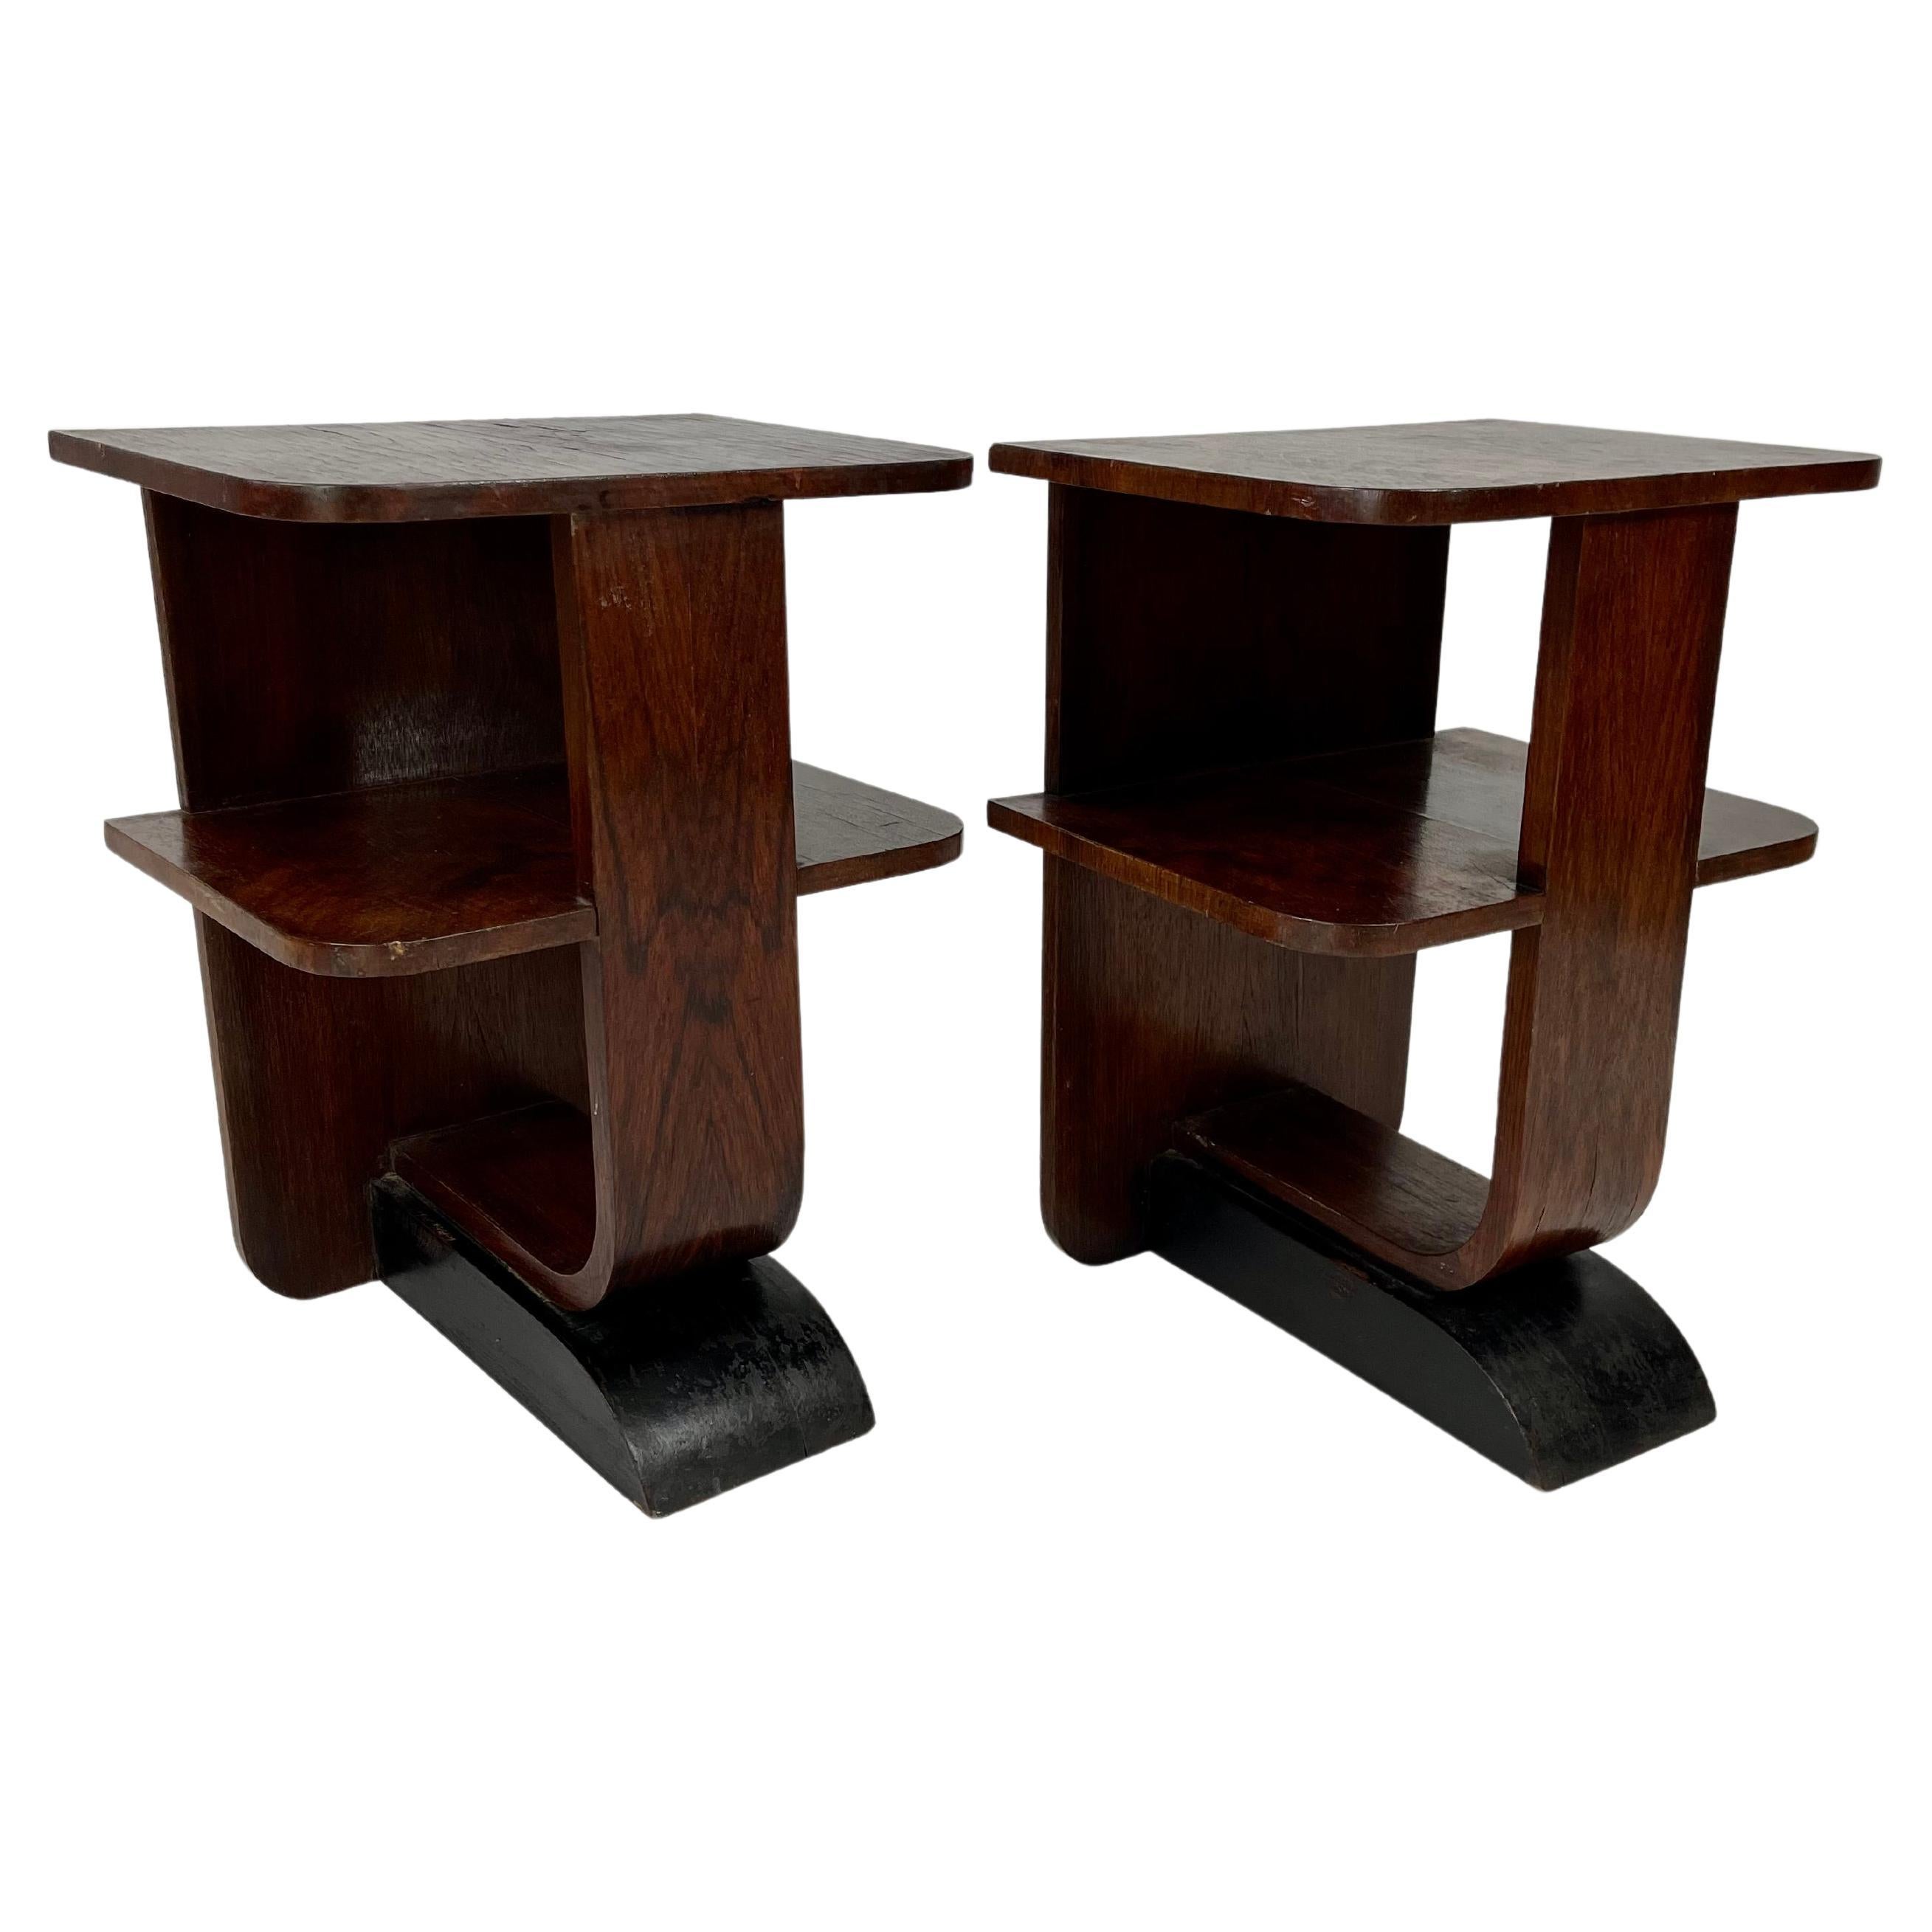 Pair of Small Art Deco End Tables with Shelves